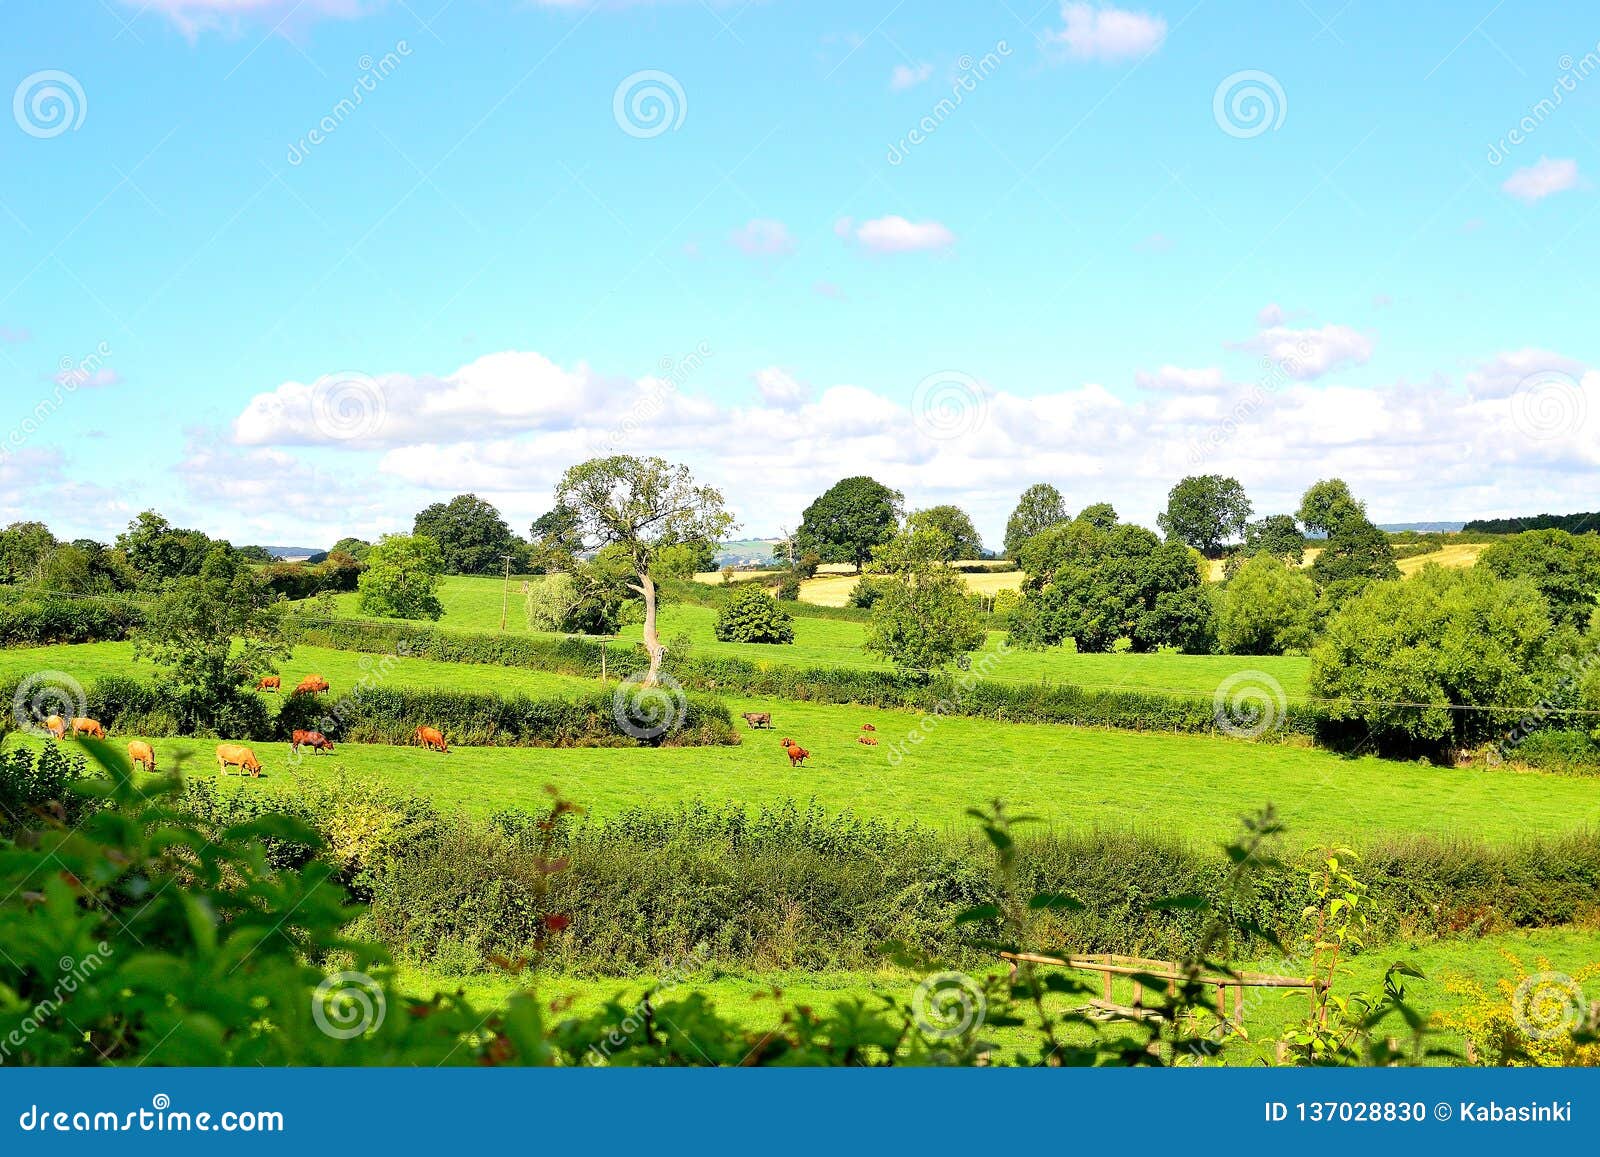 beautiful english countryside landscape in summer near ludlow in england